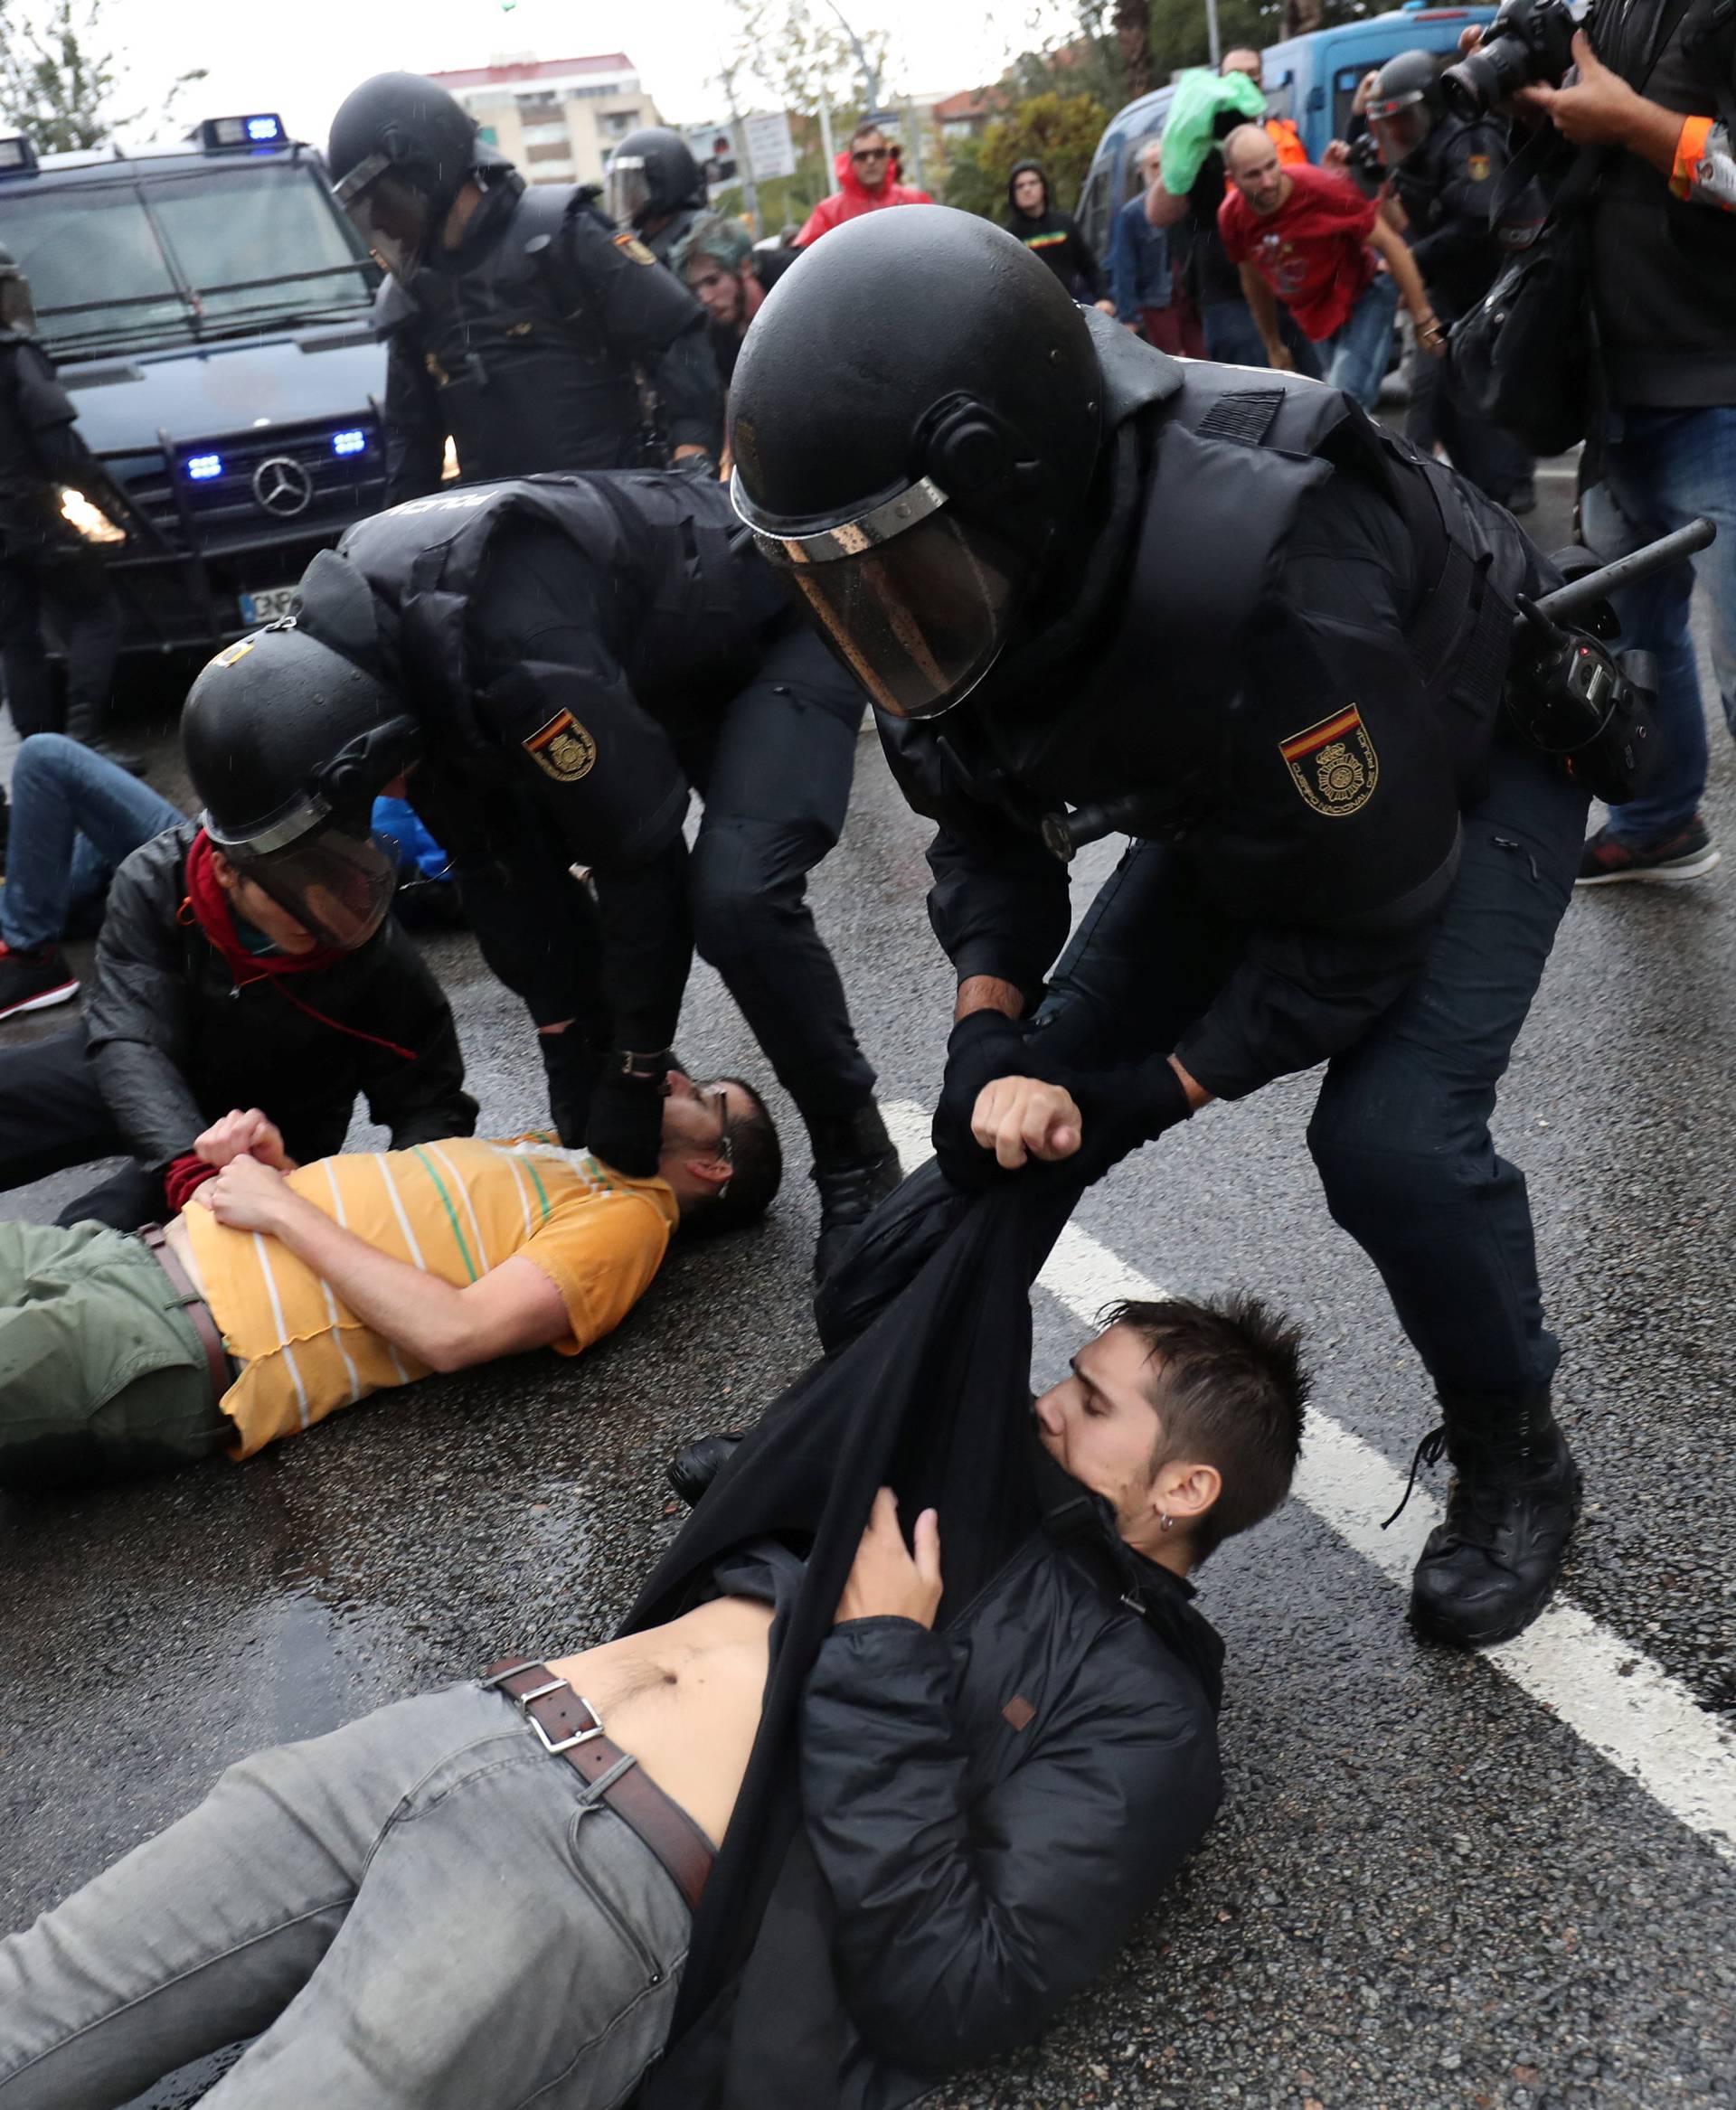 Spanish Civil Guard officers remove demonstrators outside a polling station for the banned independence referendum in Barcelona